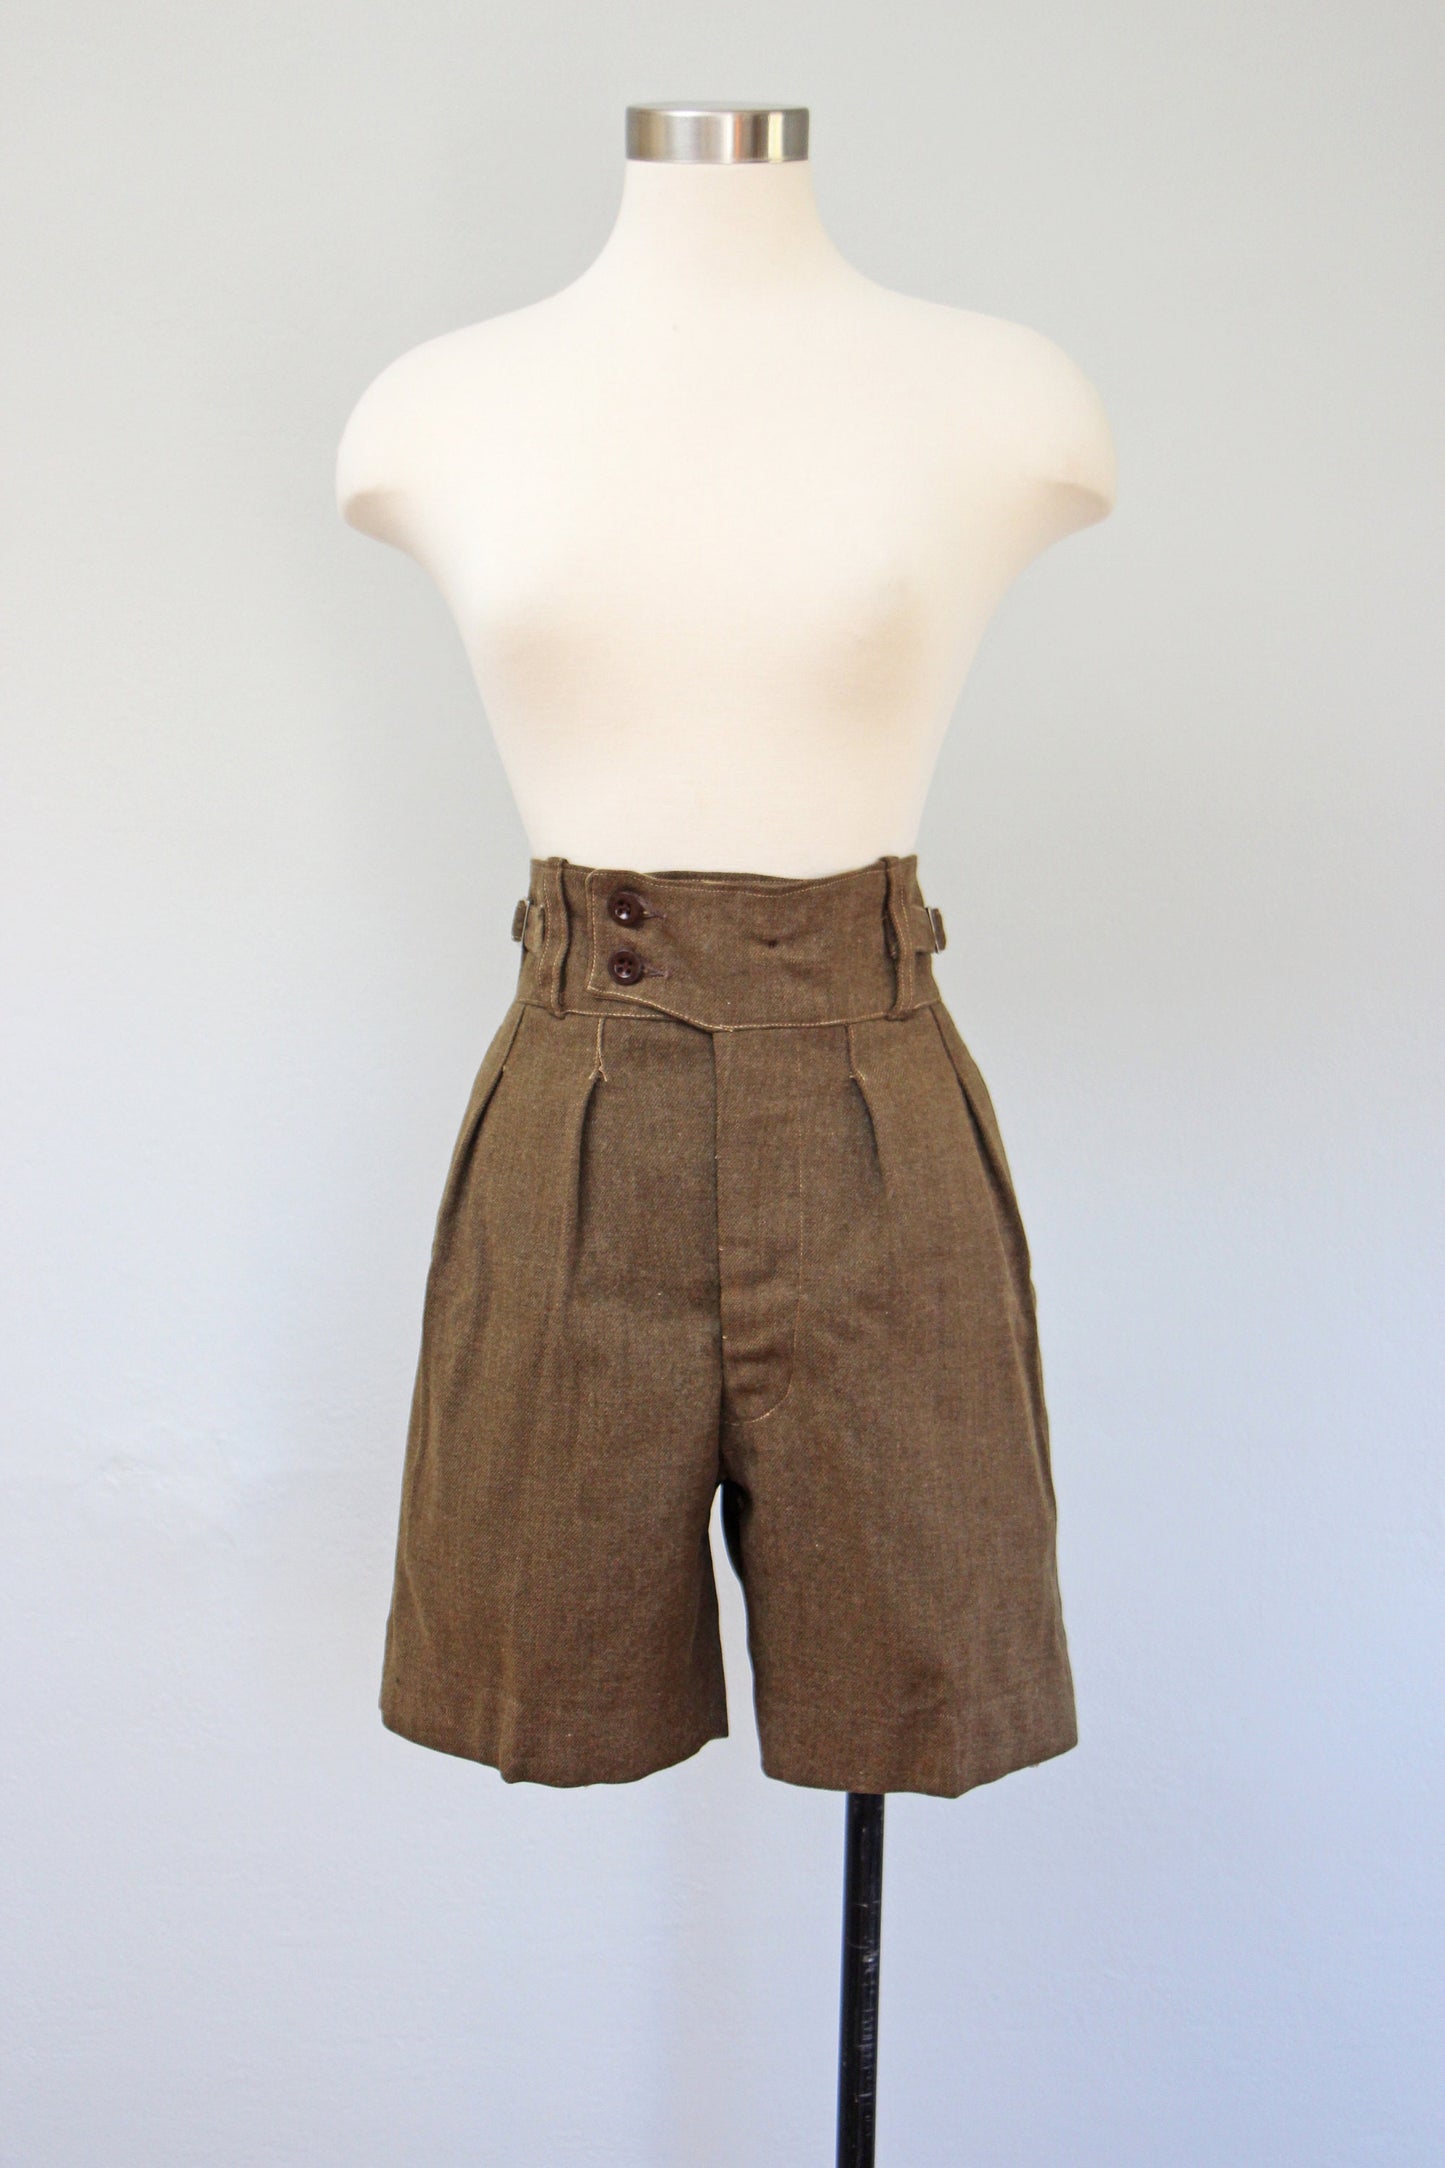 Vintage 1950s New Zealand Army Olive Green Wool Side Button High Waist Field Shorts for Adventures - Range of Sizes!